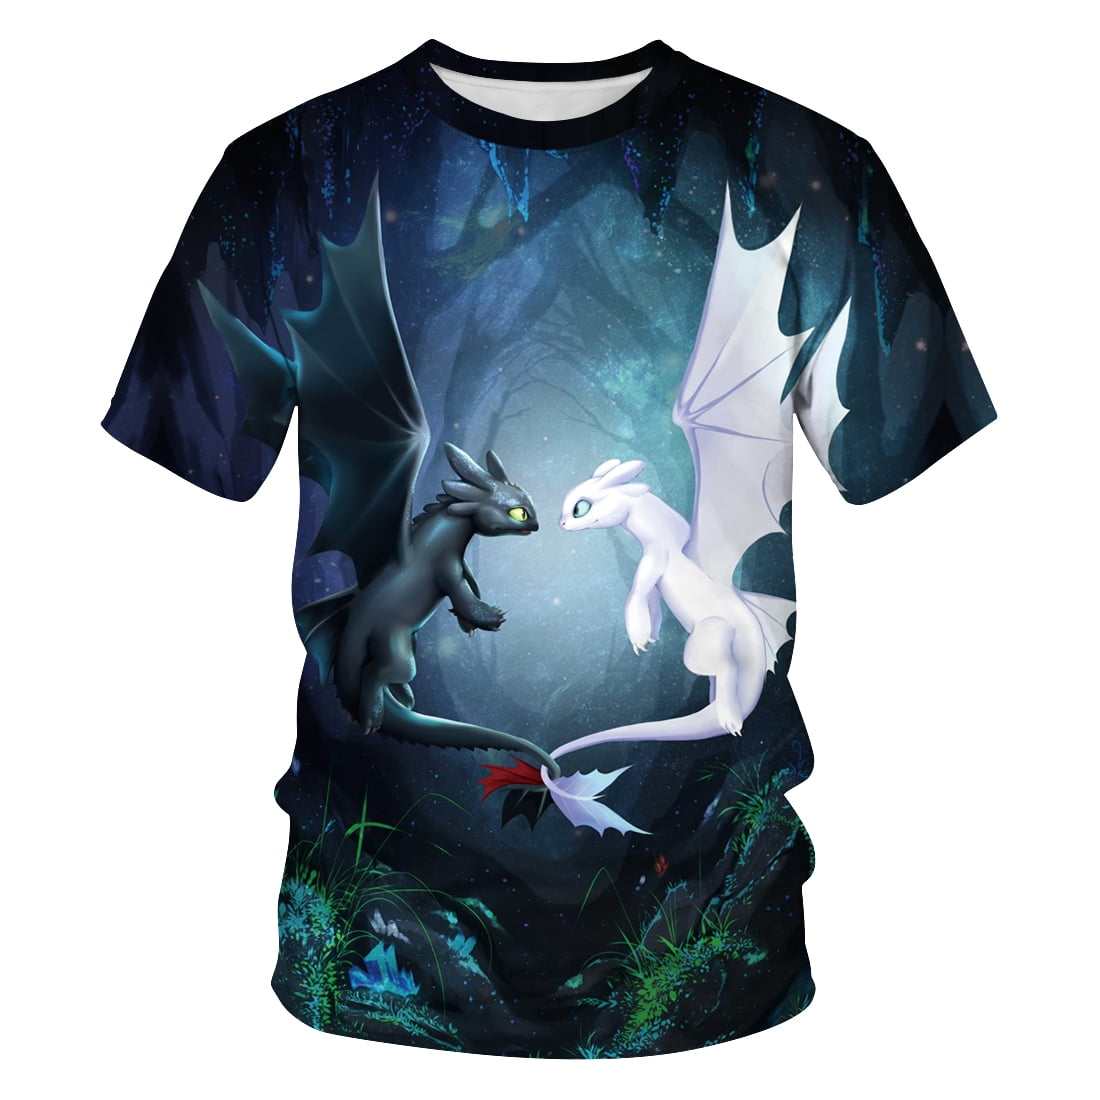 How To Train Your Dragon Kids TShirt Inspired Toothless Pokemon Top Tshirt 